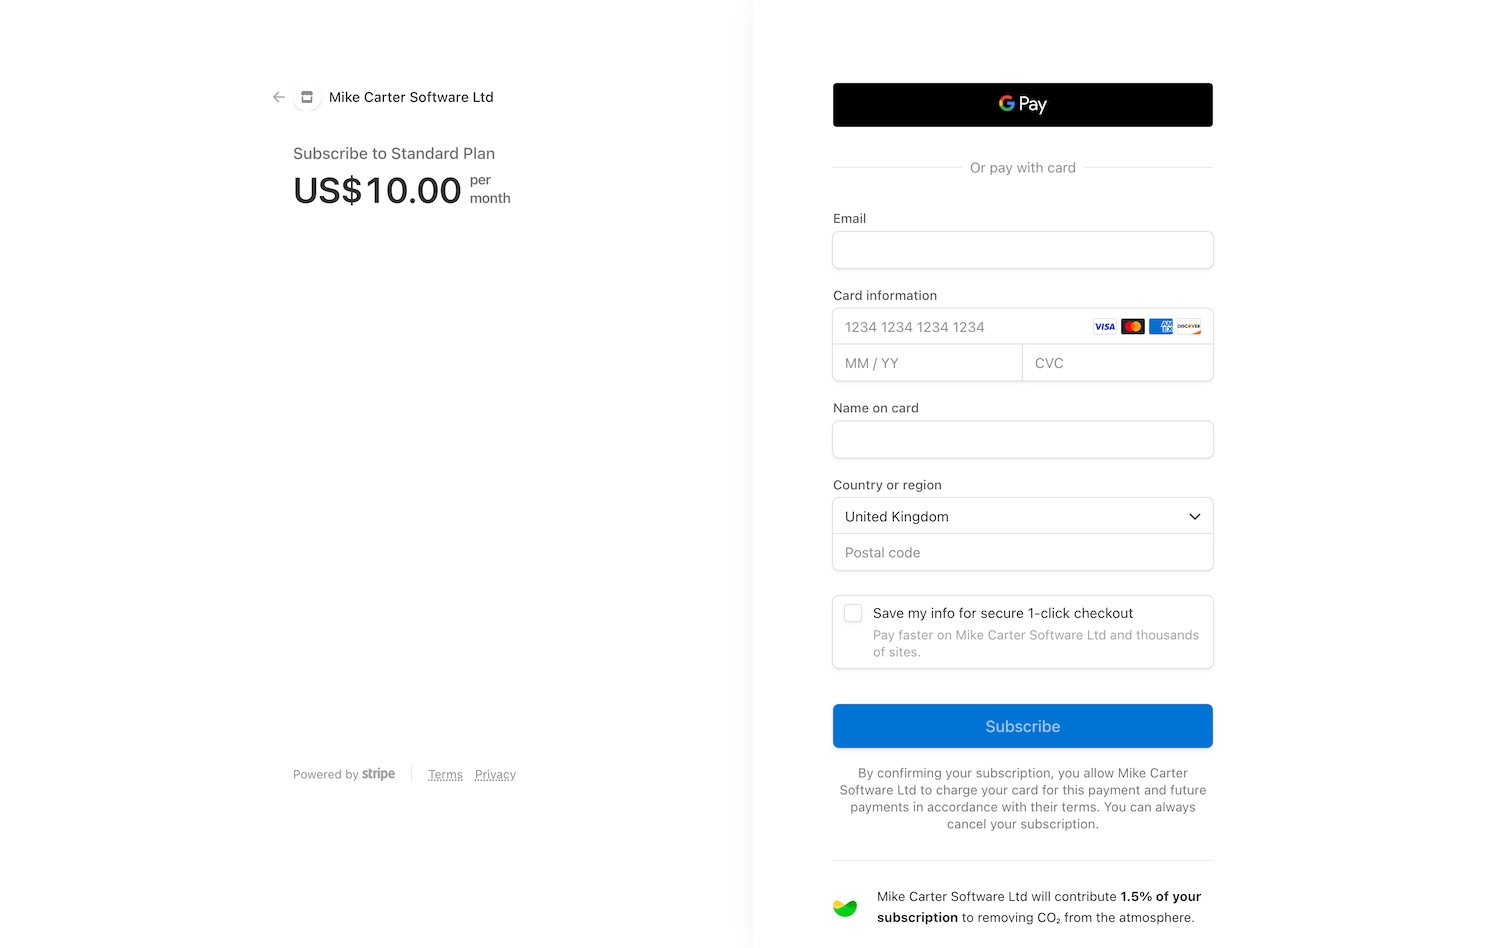 The Parable checkout page, a simple collection of payment details handled securely by Stripe.